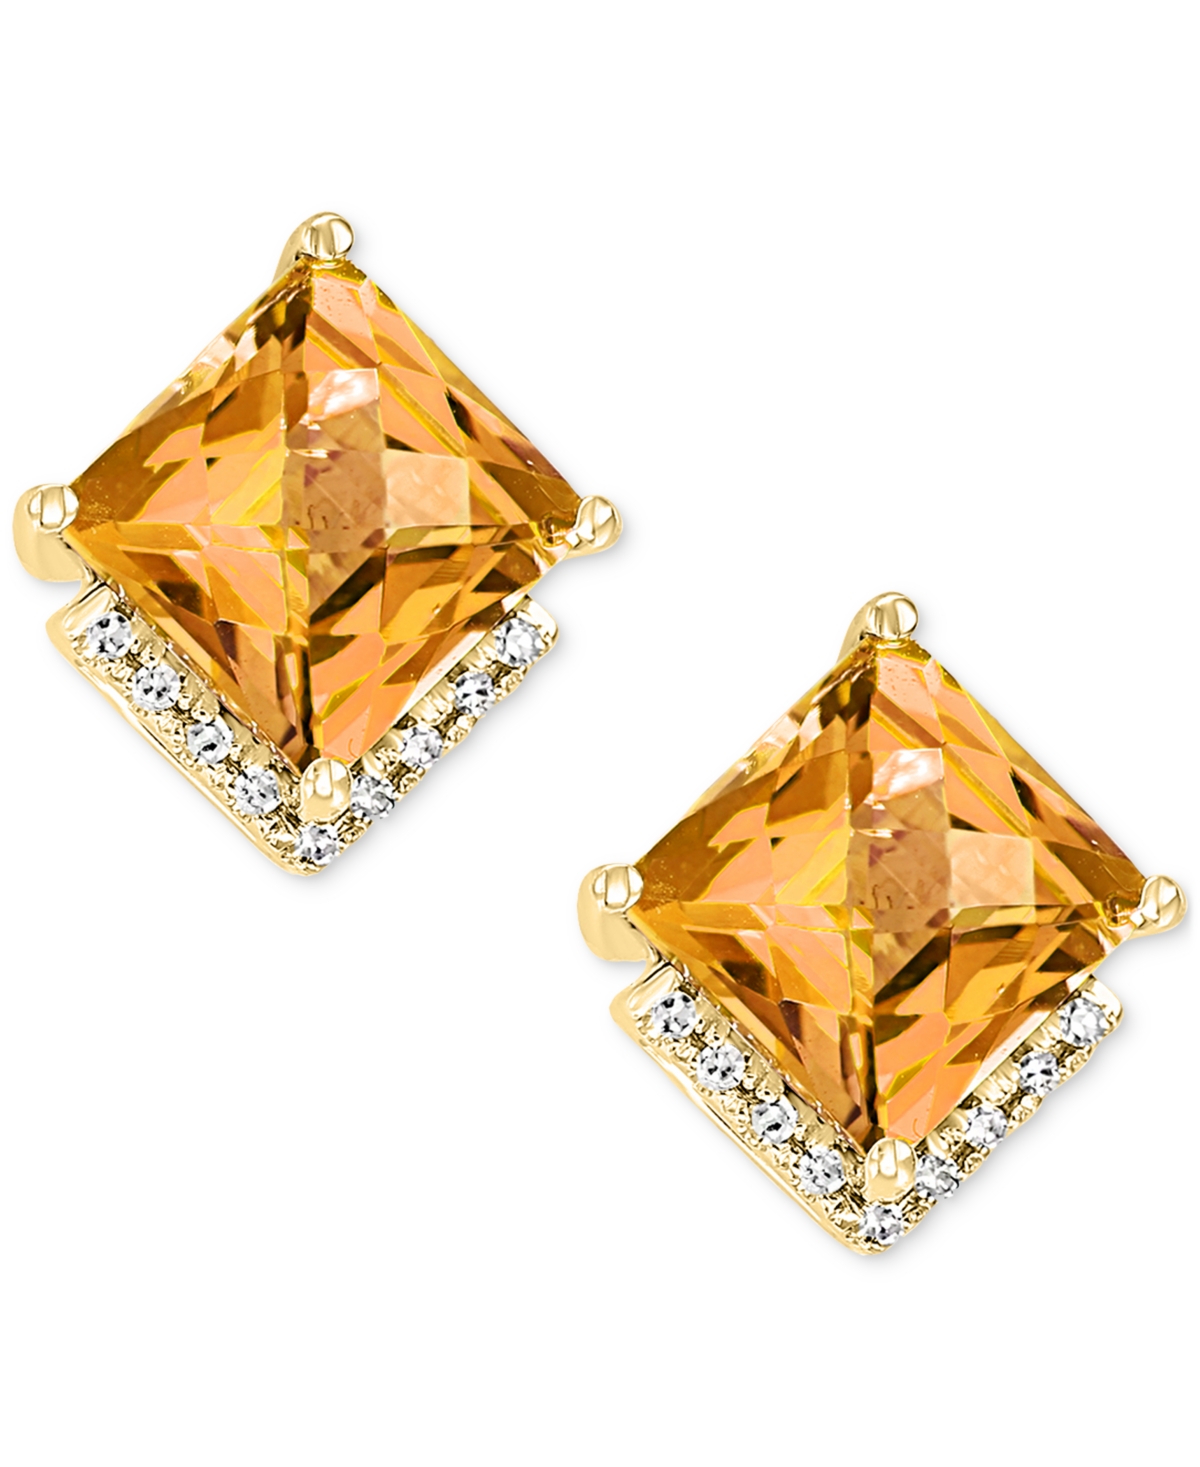 Lali Jewels Amethyst (2-7/8 ct. t.w.) & Diamond (1/20 ct. t.w.) Stud Earrings in 14k Gold (Also available in Citrine)